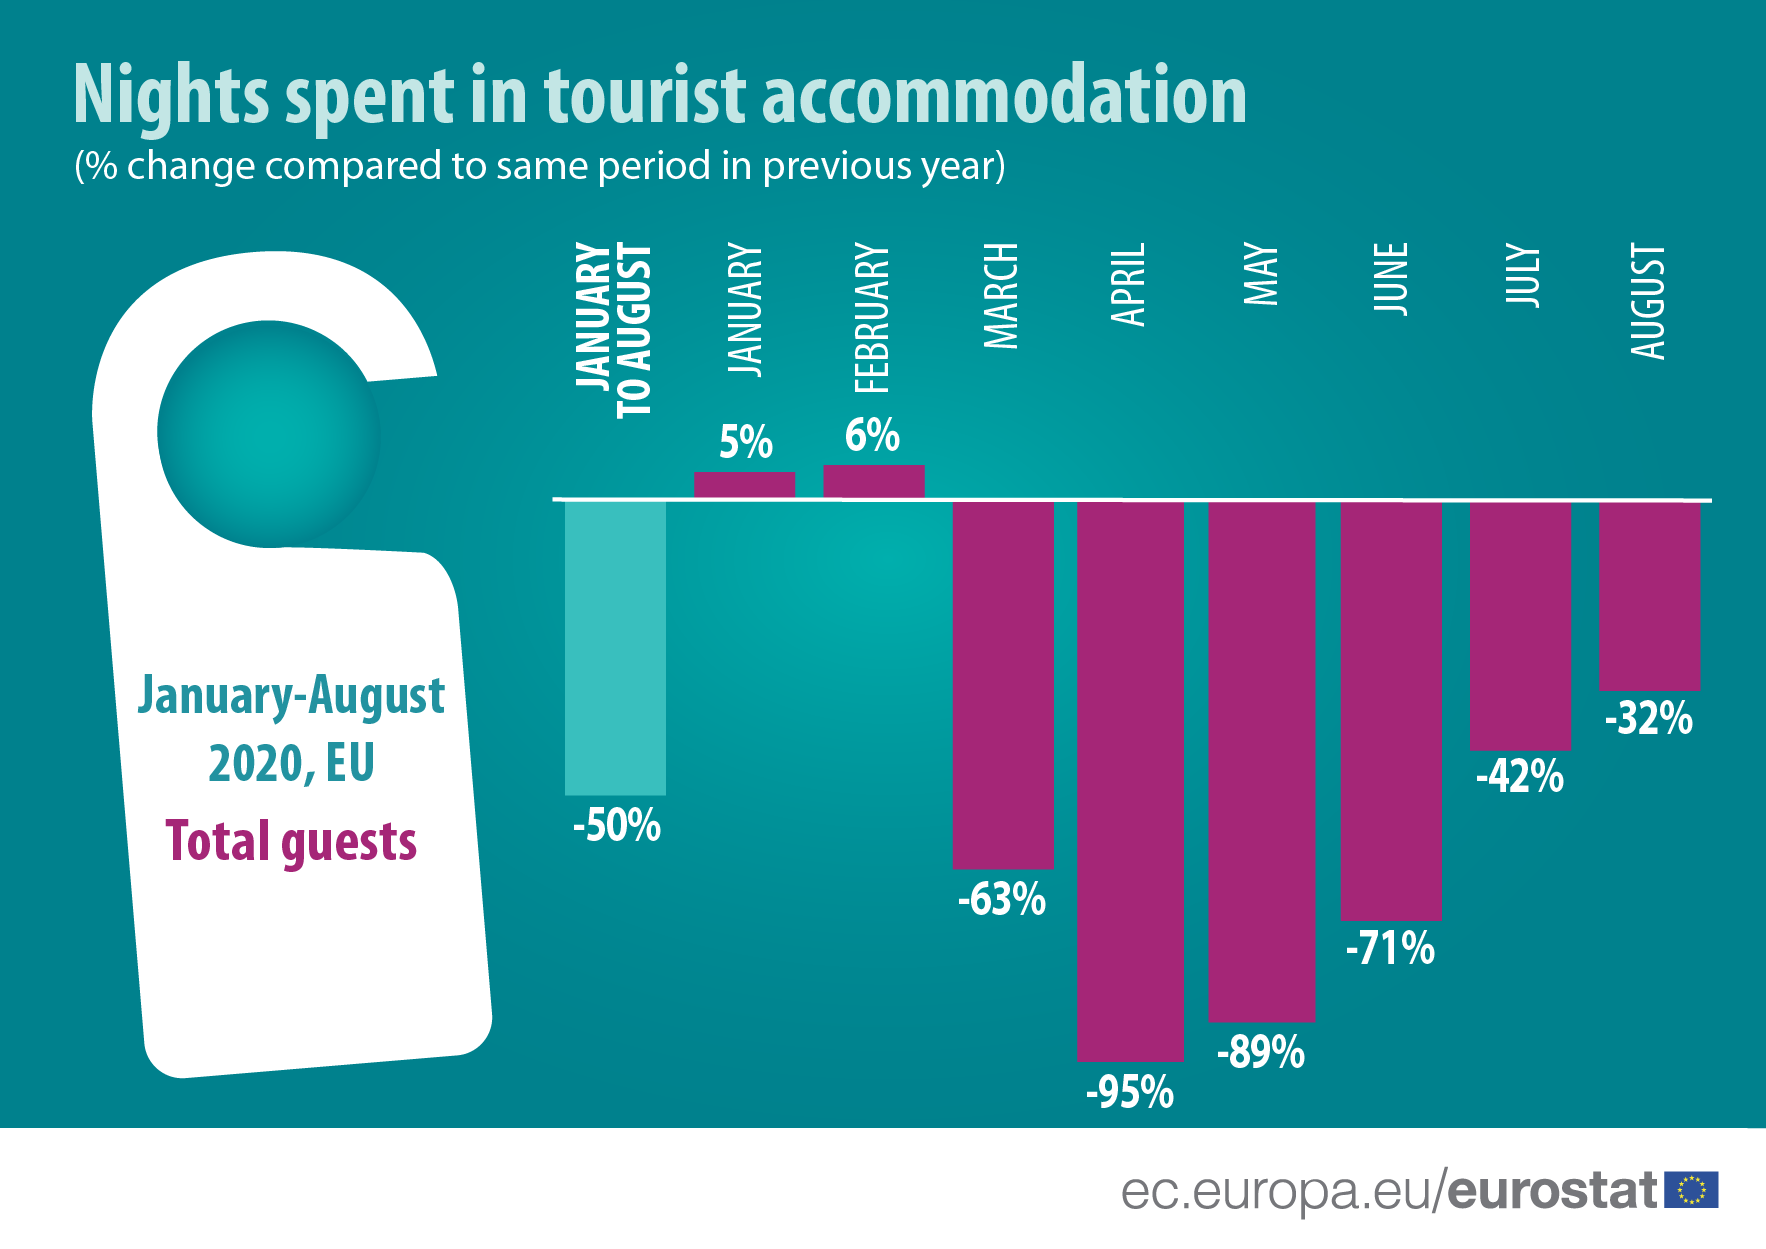 Infographic: Nights spent in tourist accommodation, 2020